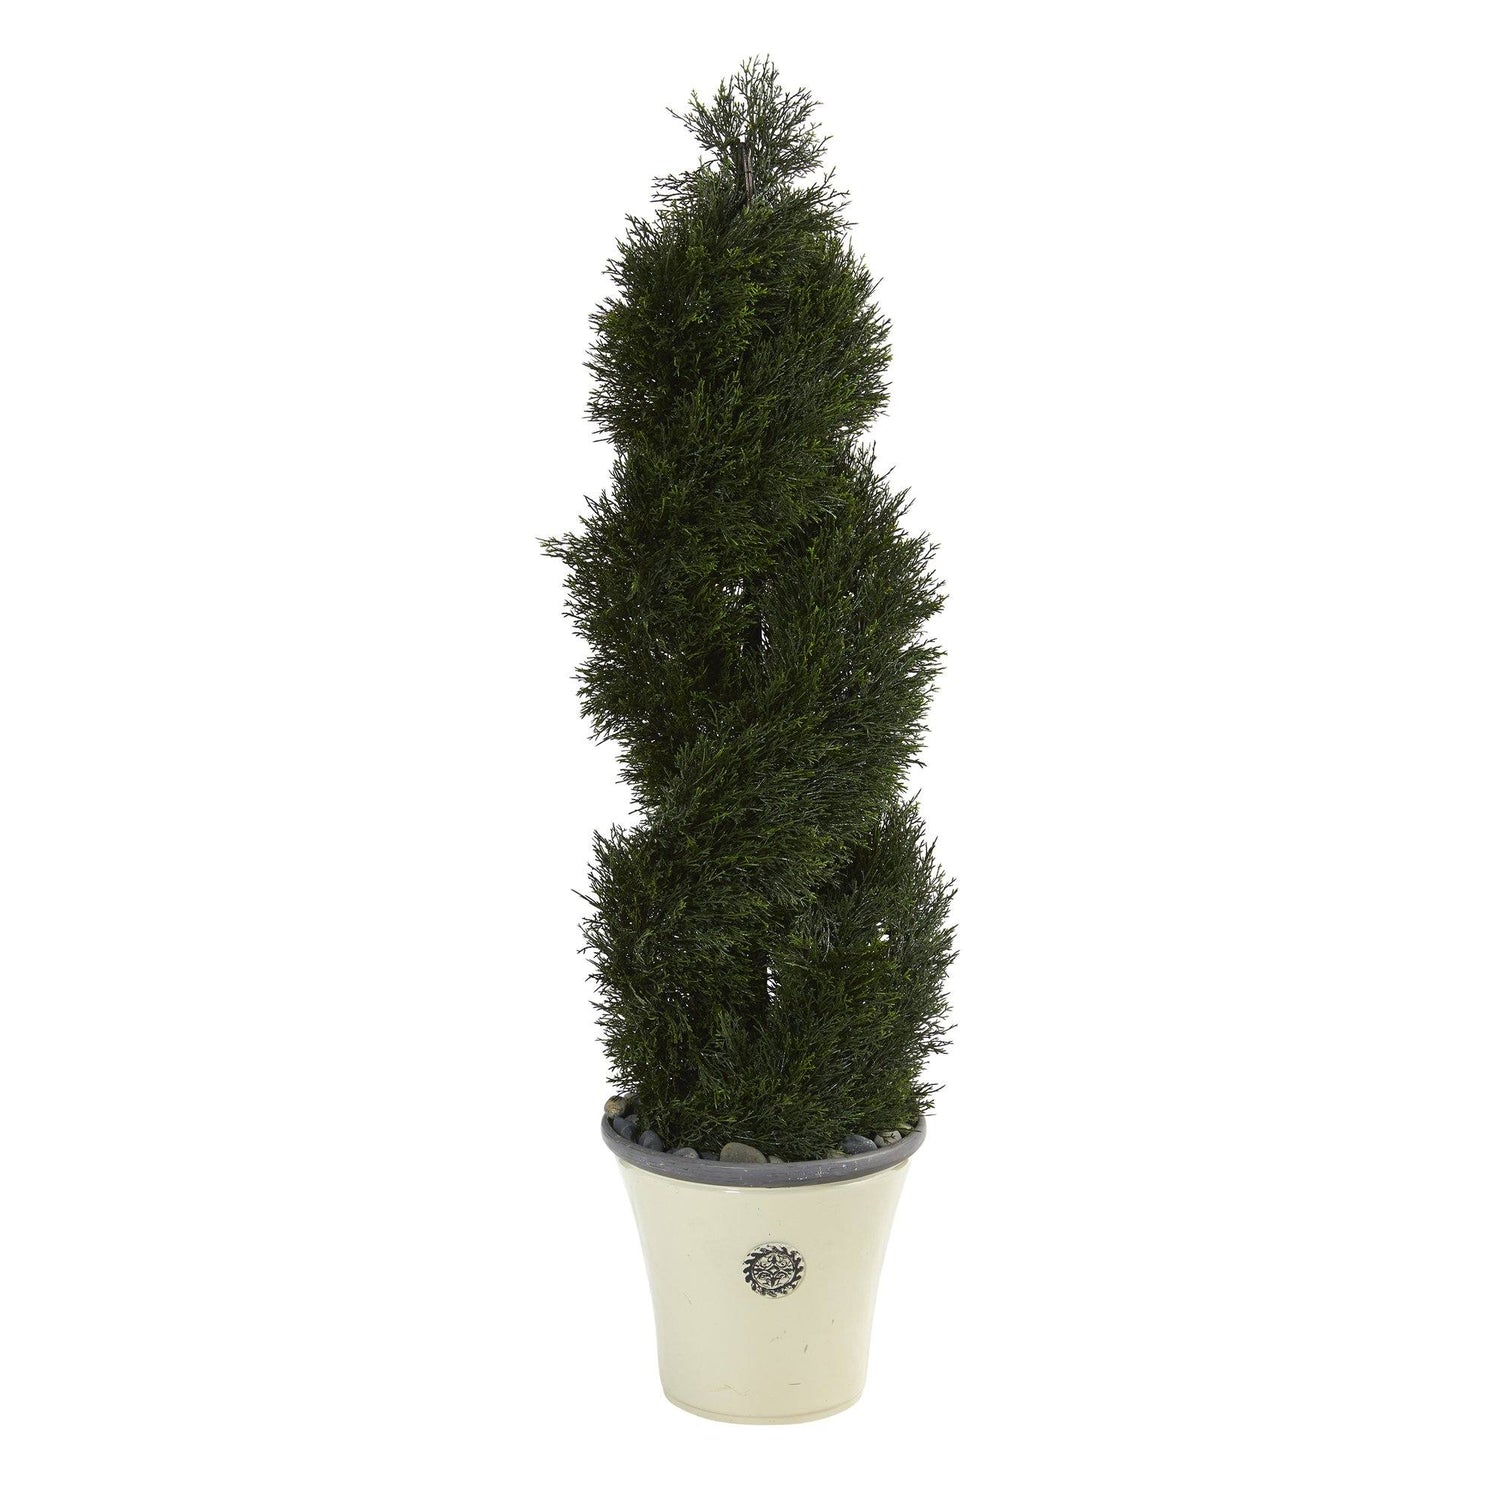 52” Double Pond Cypress Spiral Topiary Artificial Tree in Planter (Indoor/Outdoor)